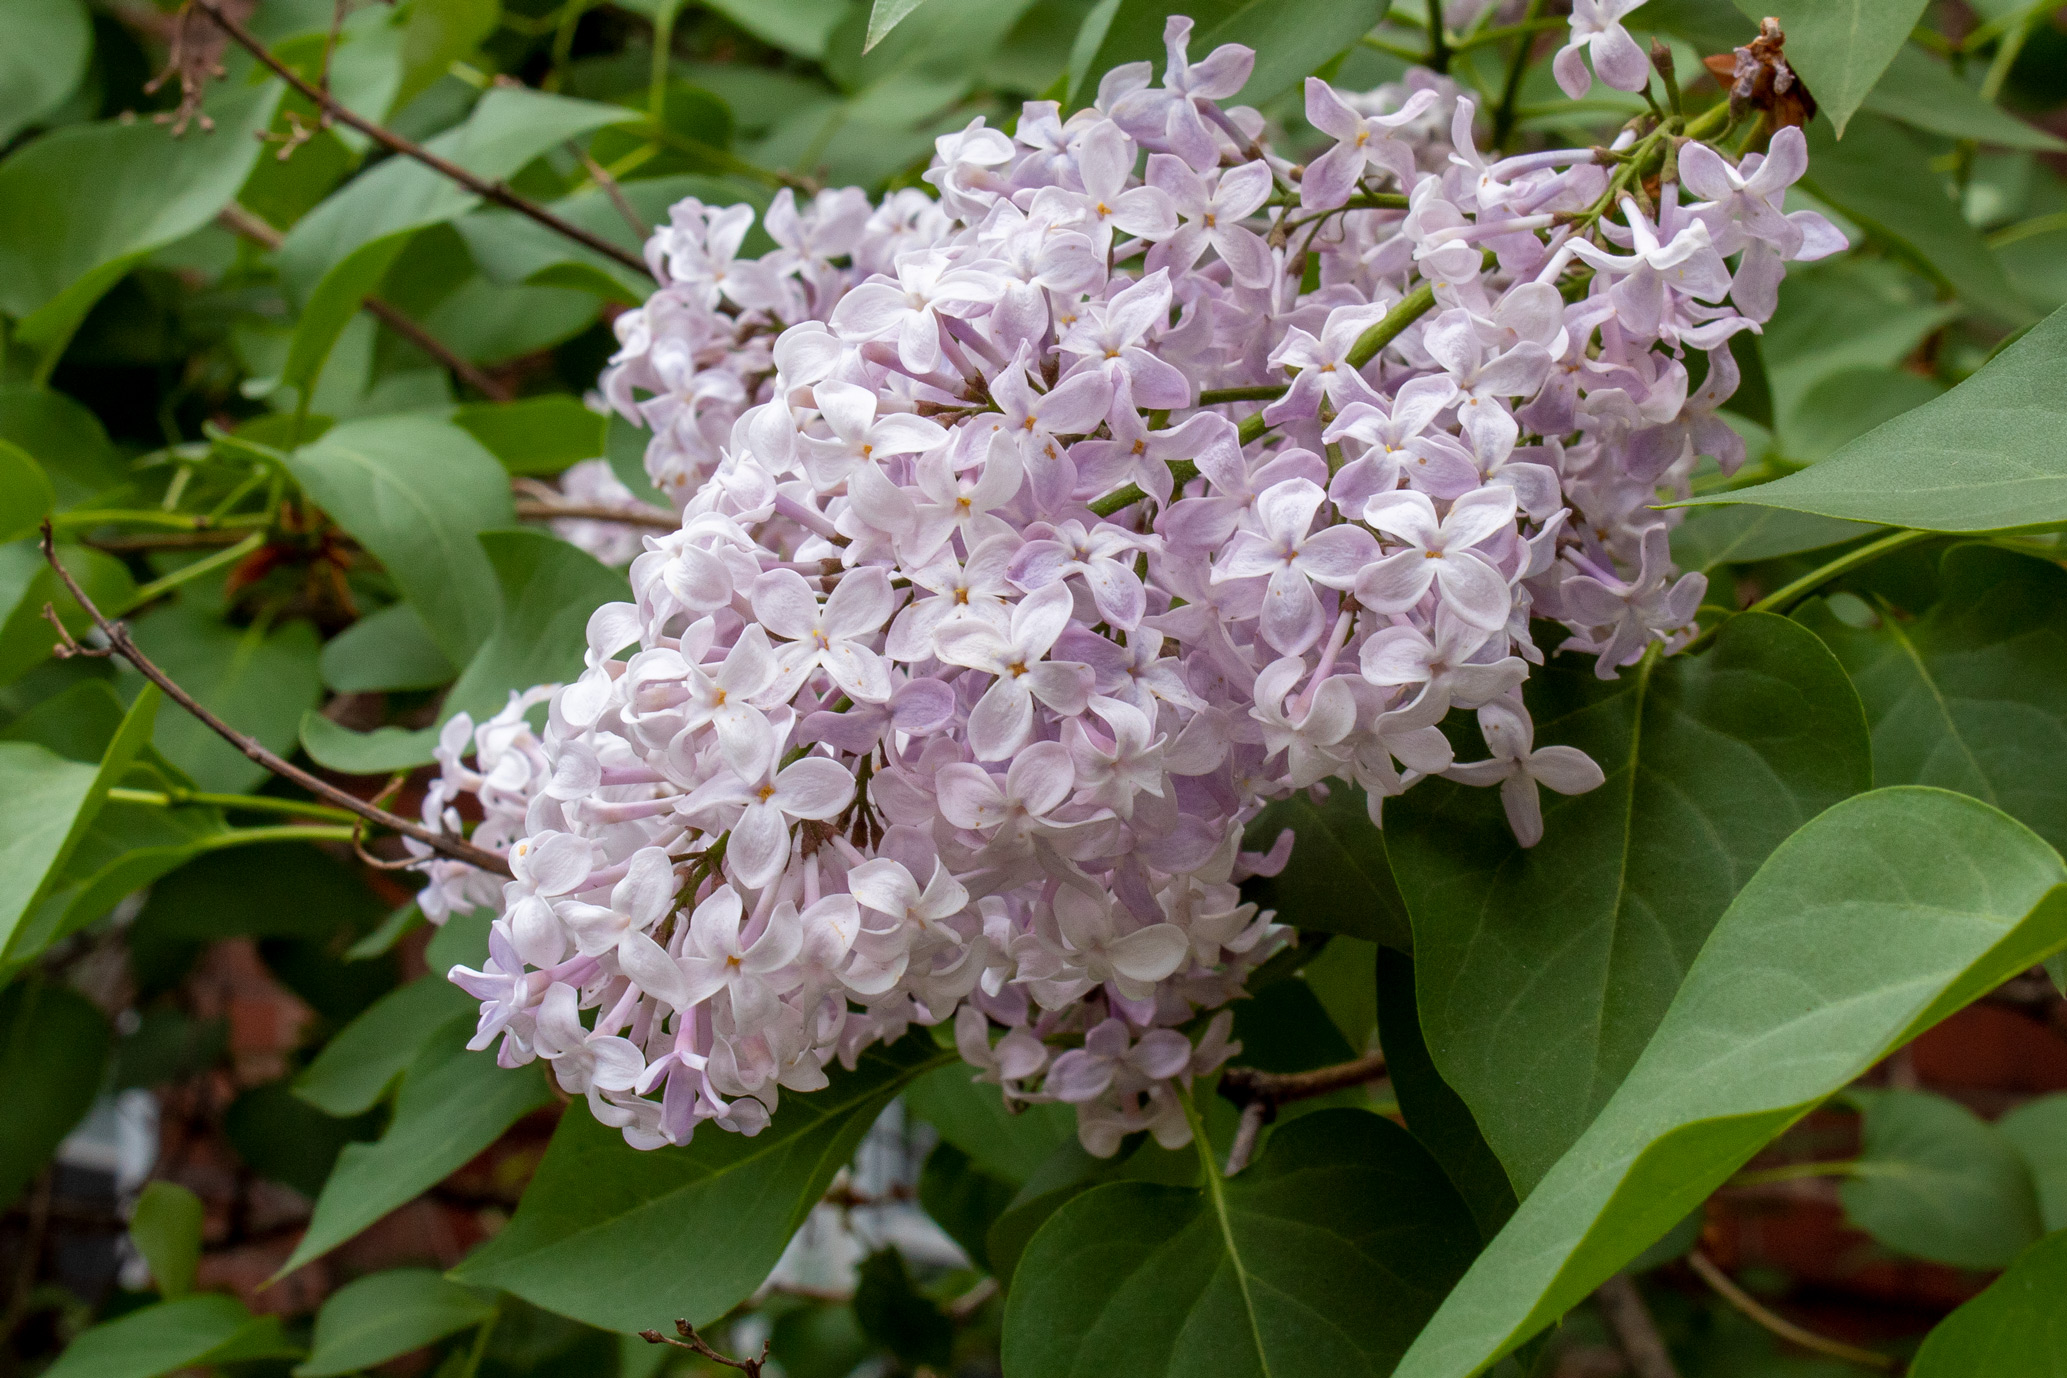 Clump of pale pink flowers surrounded by leaves